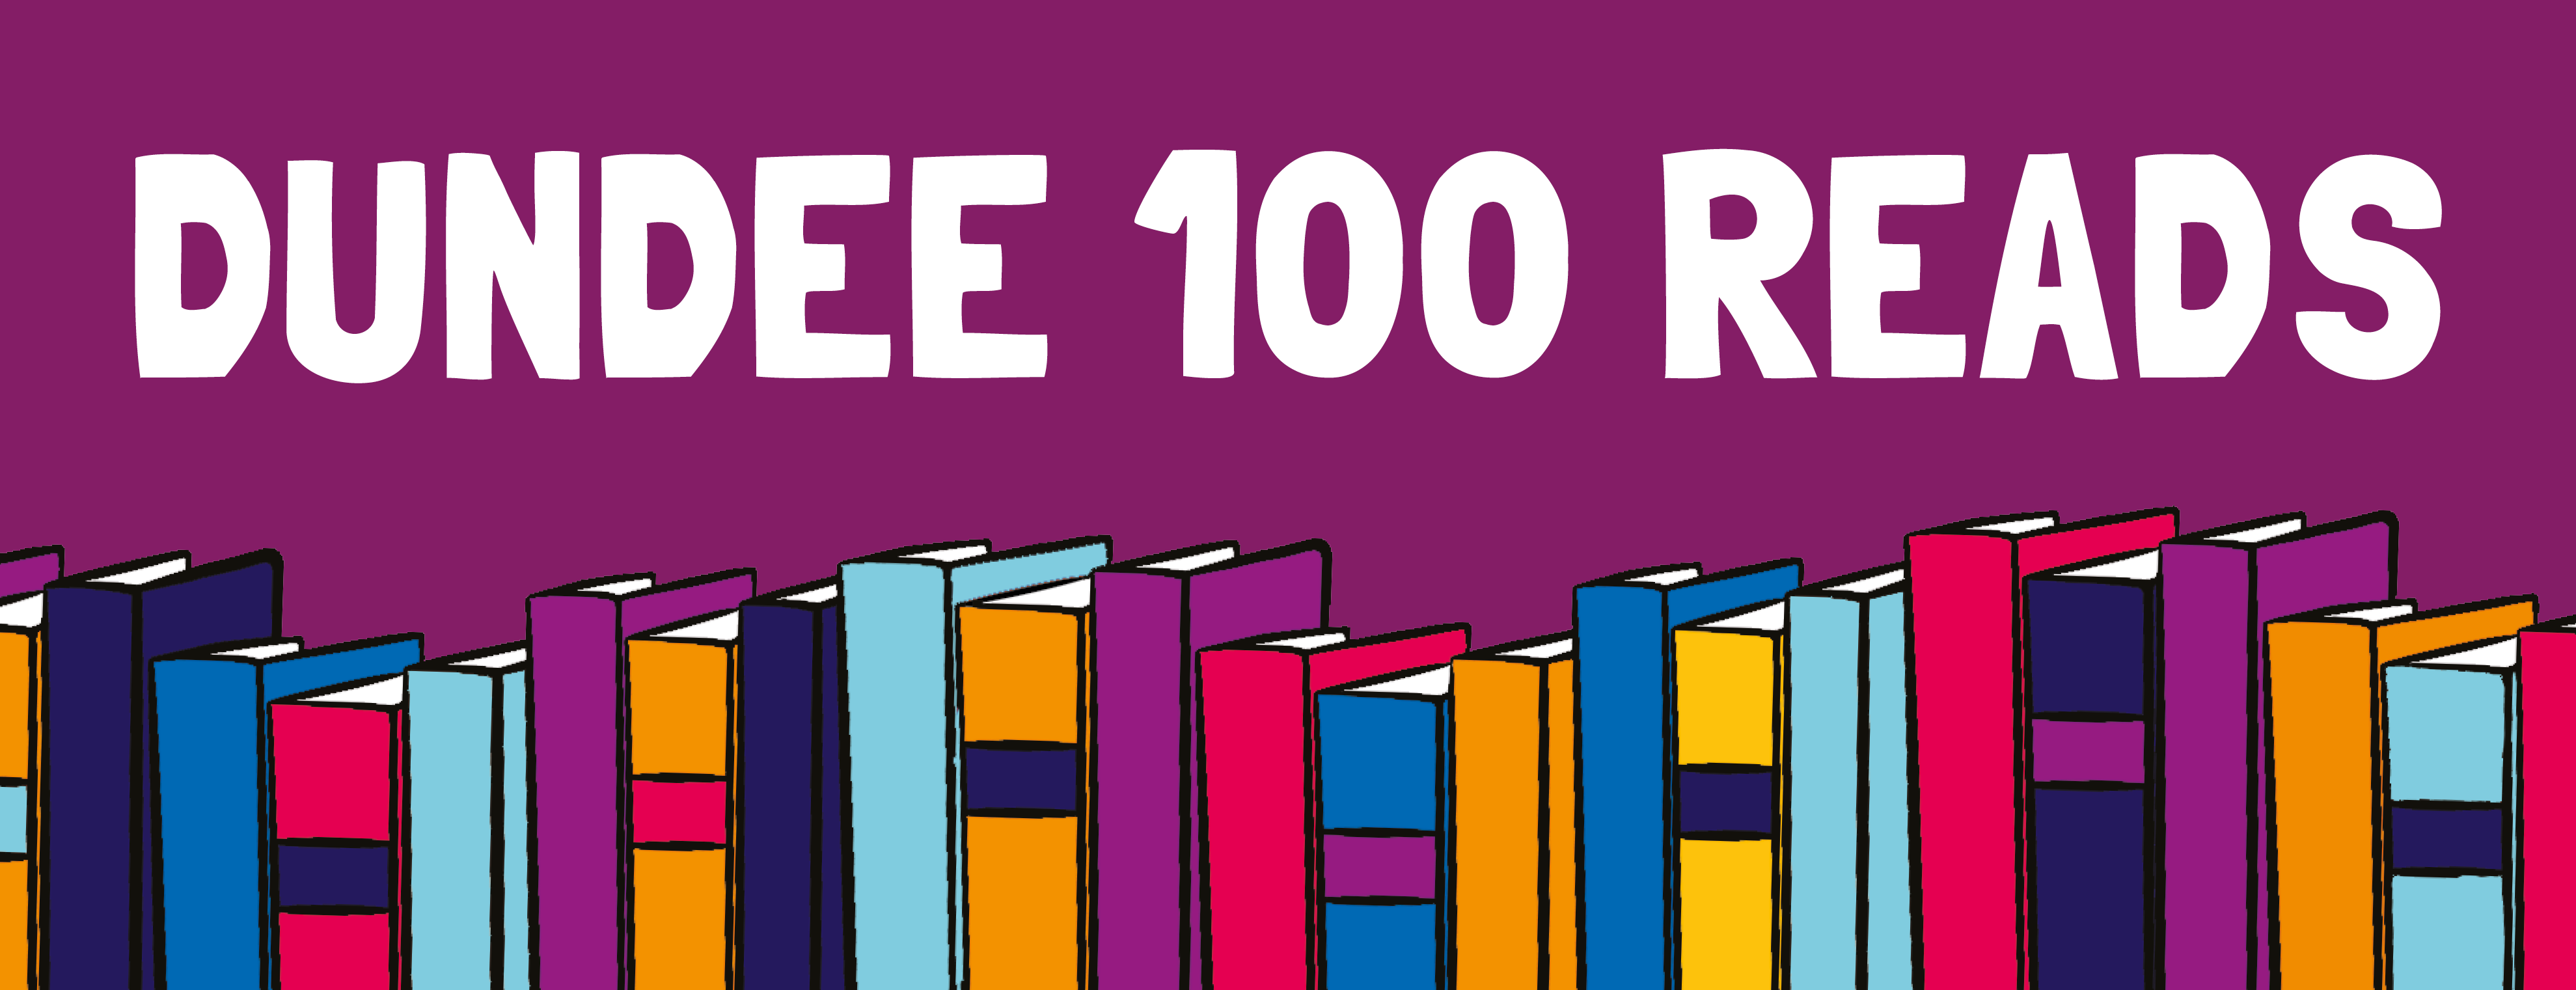 Dundee 100 Reads Web Banner2